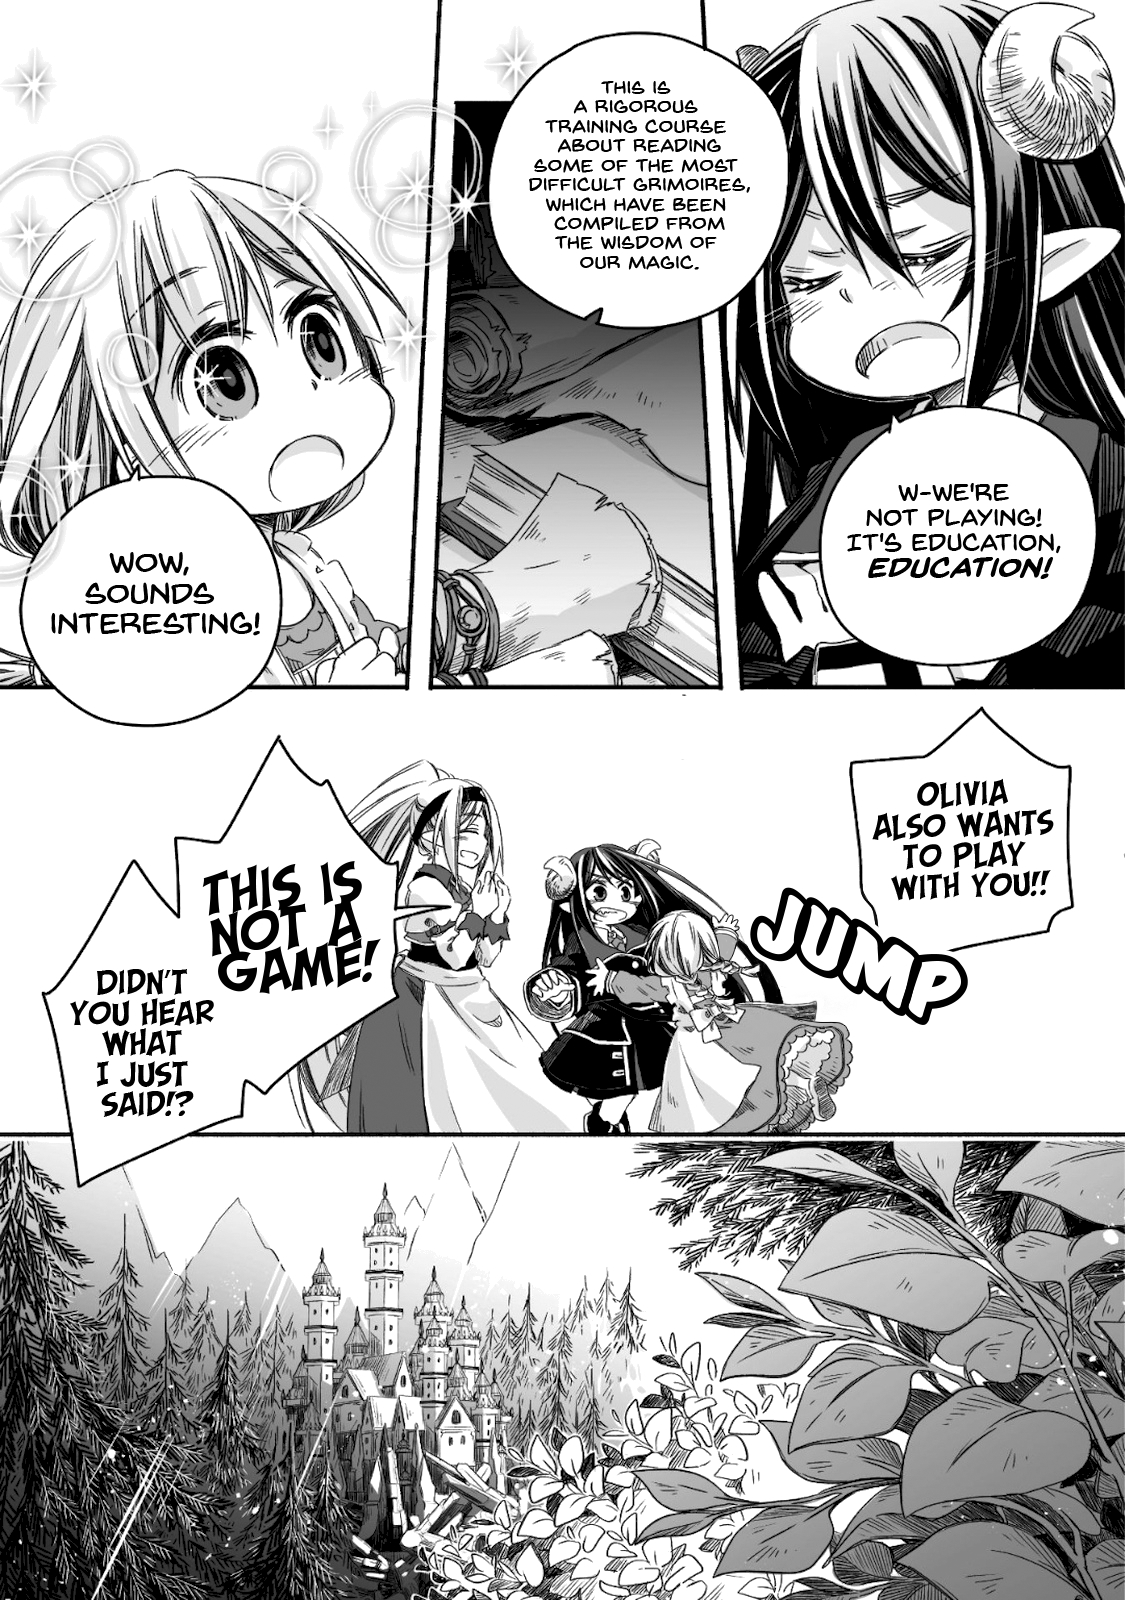 Parenting Diary Of The Strongest Dragon Who Suddenly Became A Dad ～ Cute Daughter, Heartwarming And Growing Up To Be The Strongest In The Human World ～ - 6 page 6